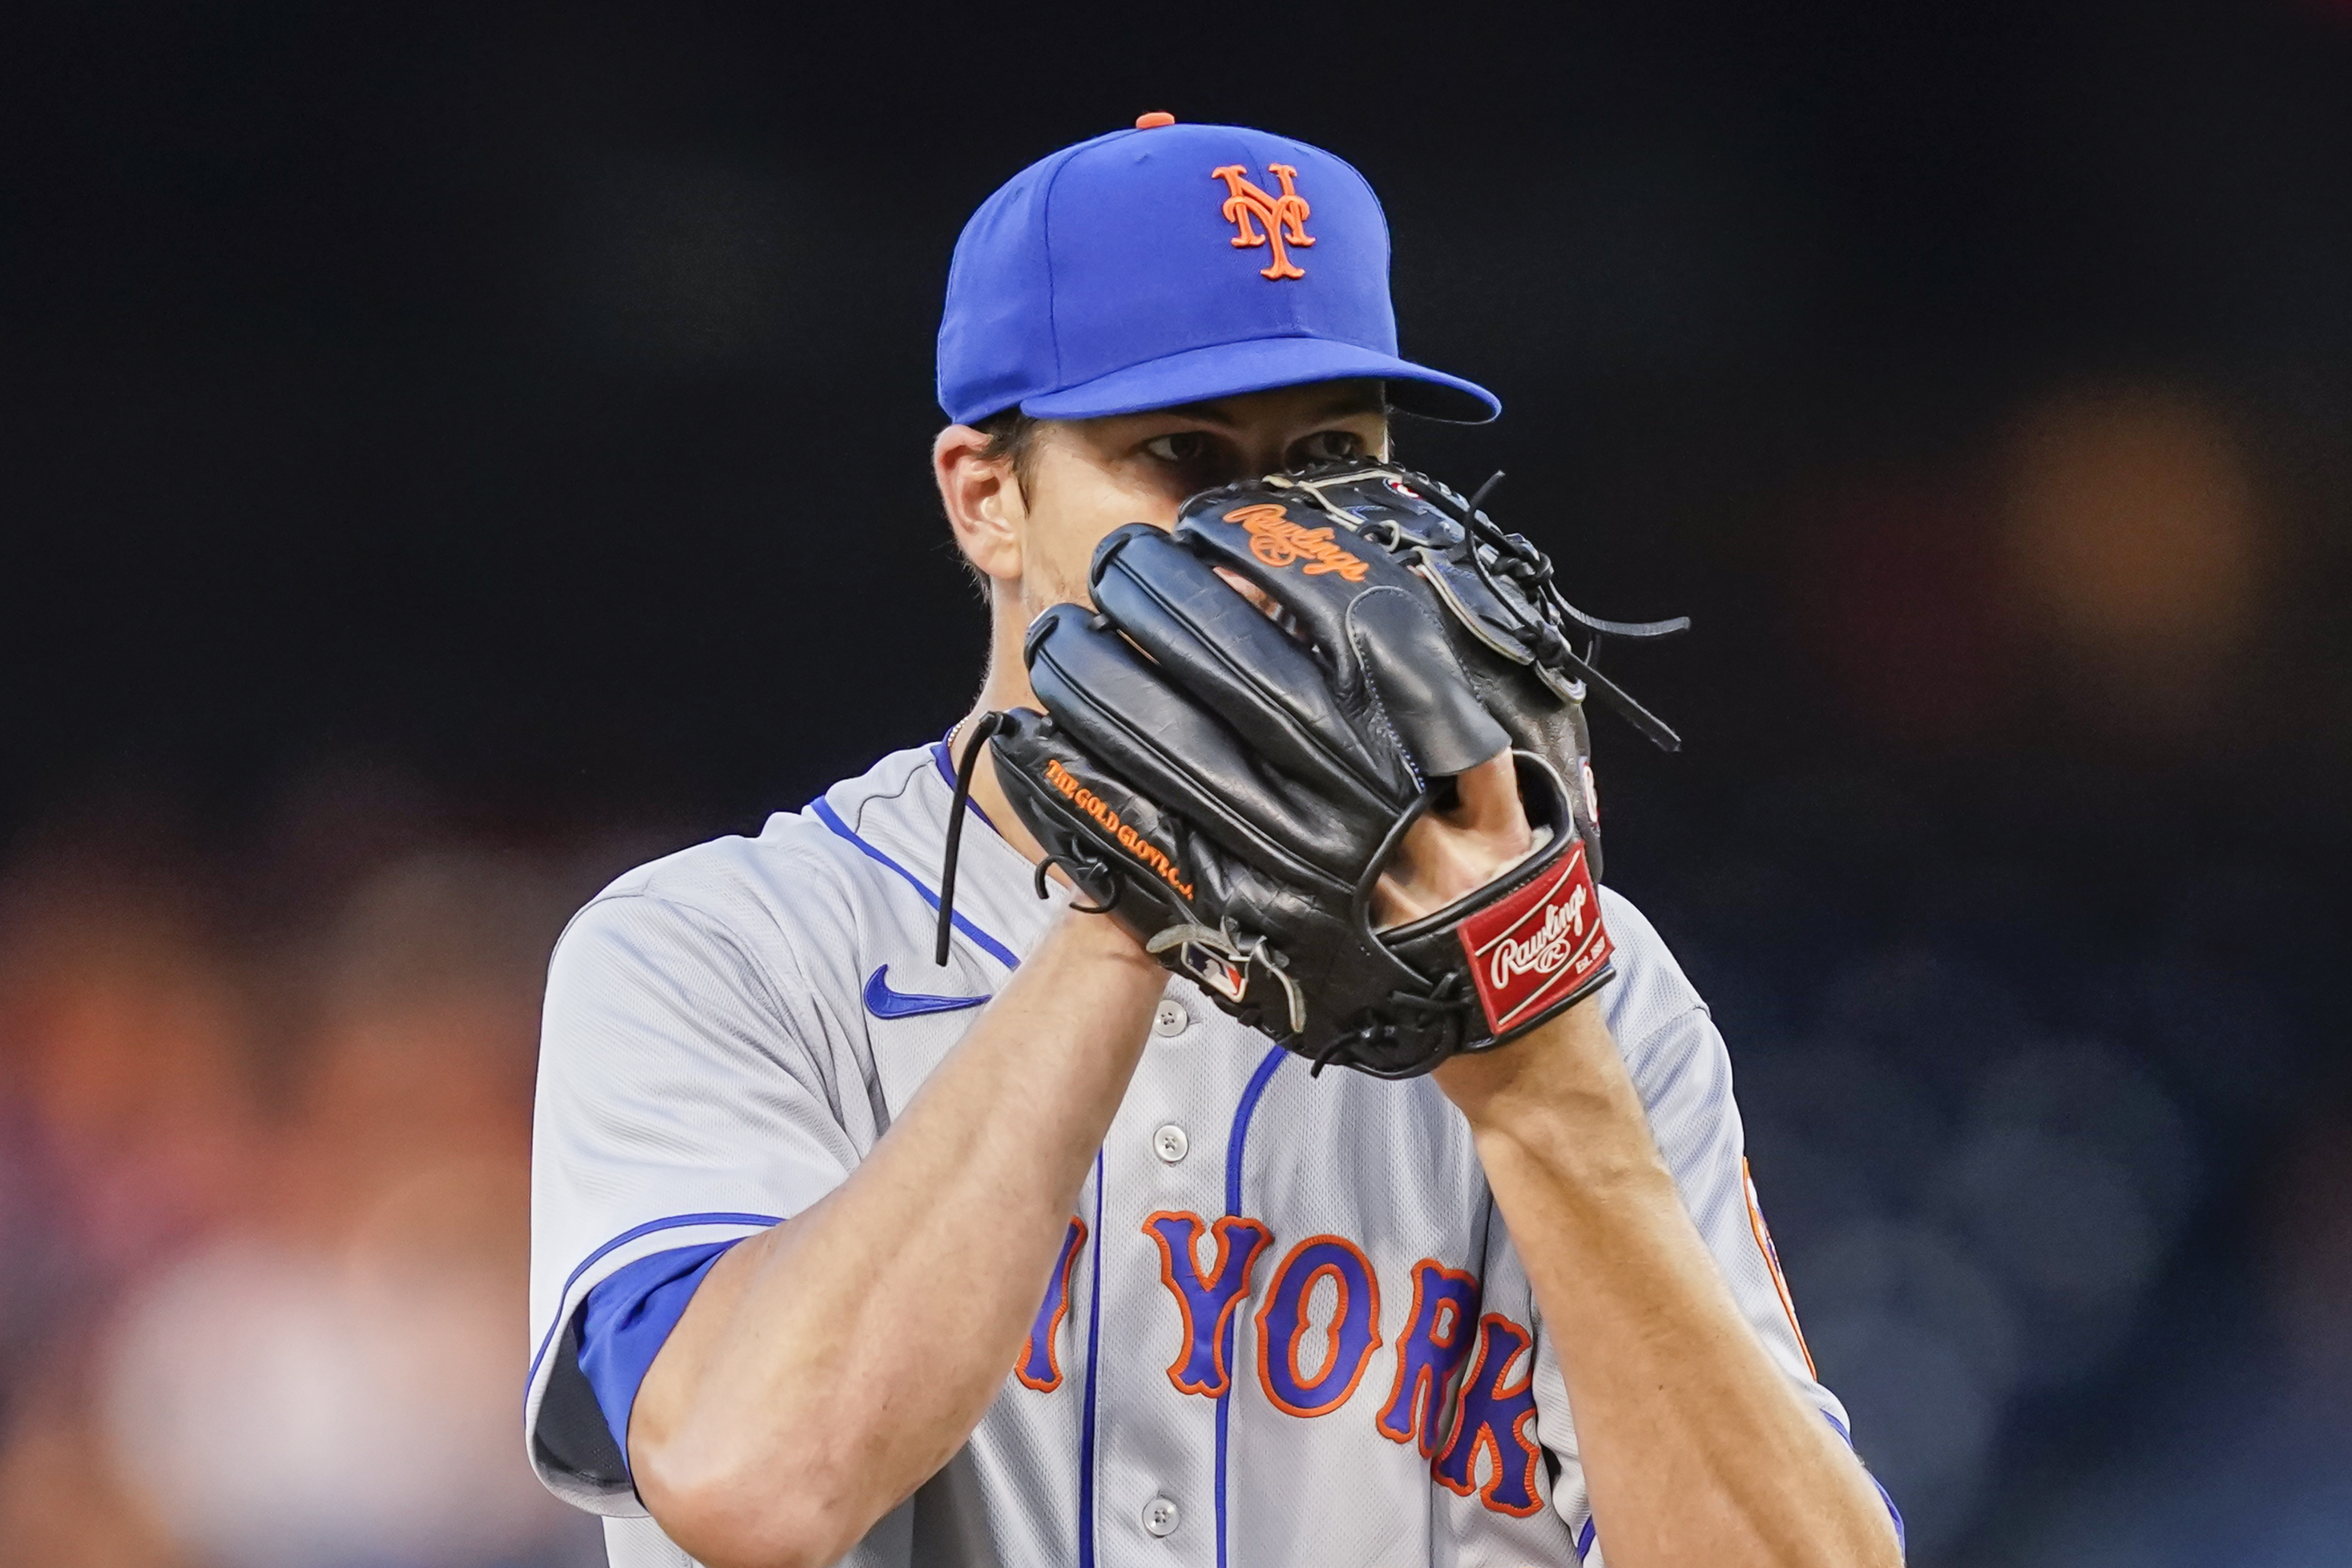 Jacob deGrom after another Mets loss: 'I'm frustrated. I'm tired of losing